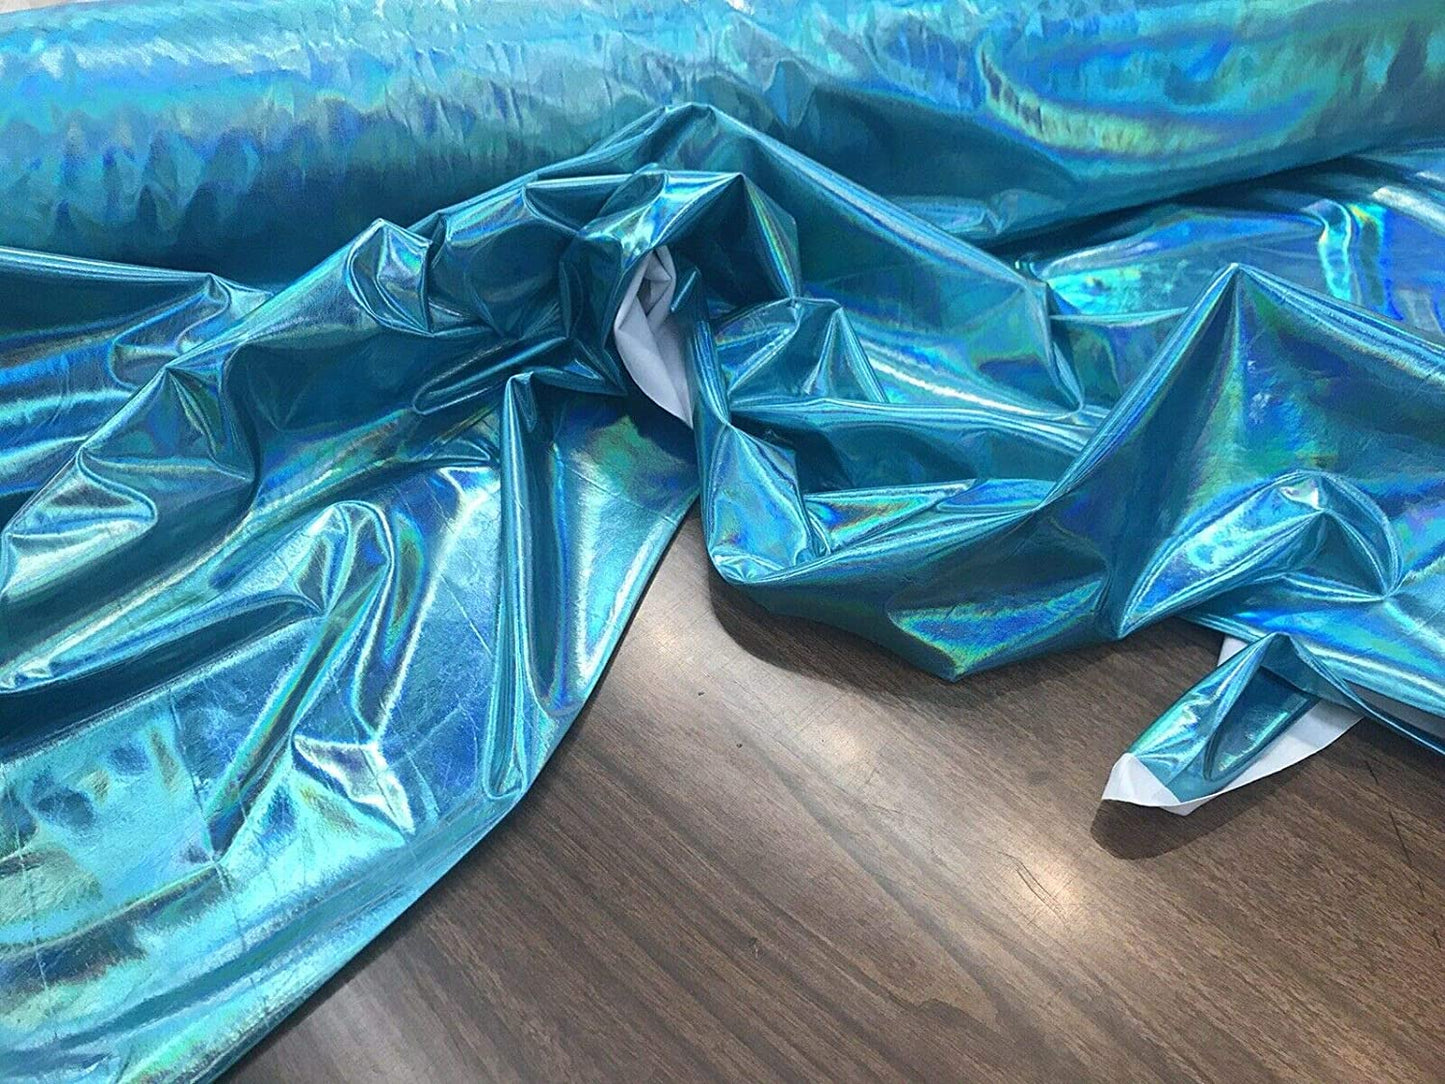 54" Wide Faux Leather Vinyl 4 Way Stretch Spandex Dance Wear Fabric by The Yard (Turquoise, REFRACTIVE Hologram)